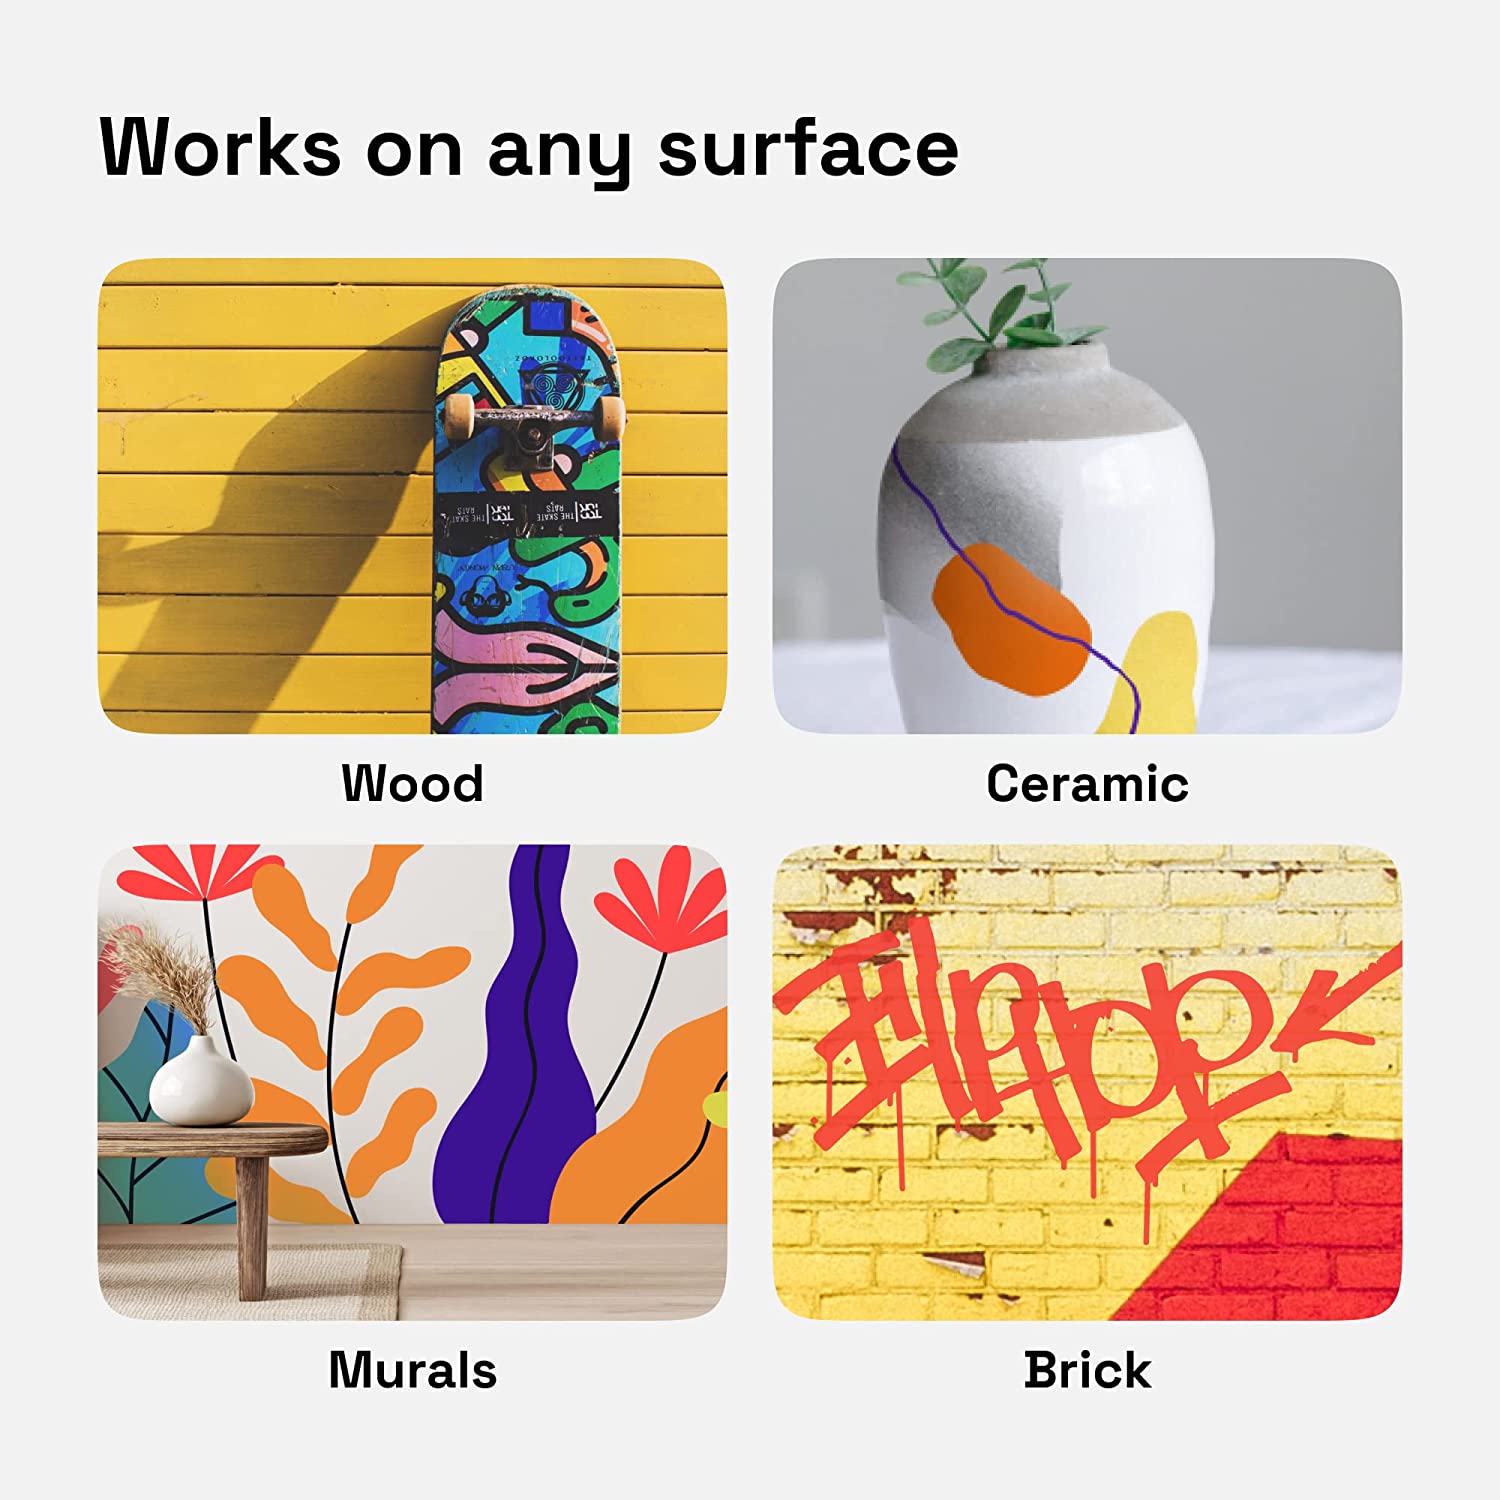 works on any surface: wood, ceramic, murals, brick